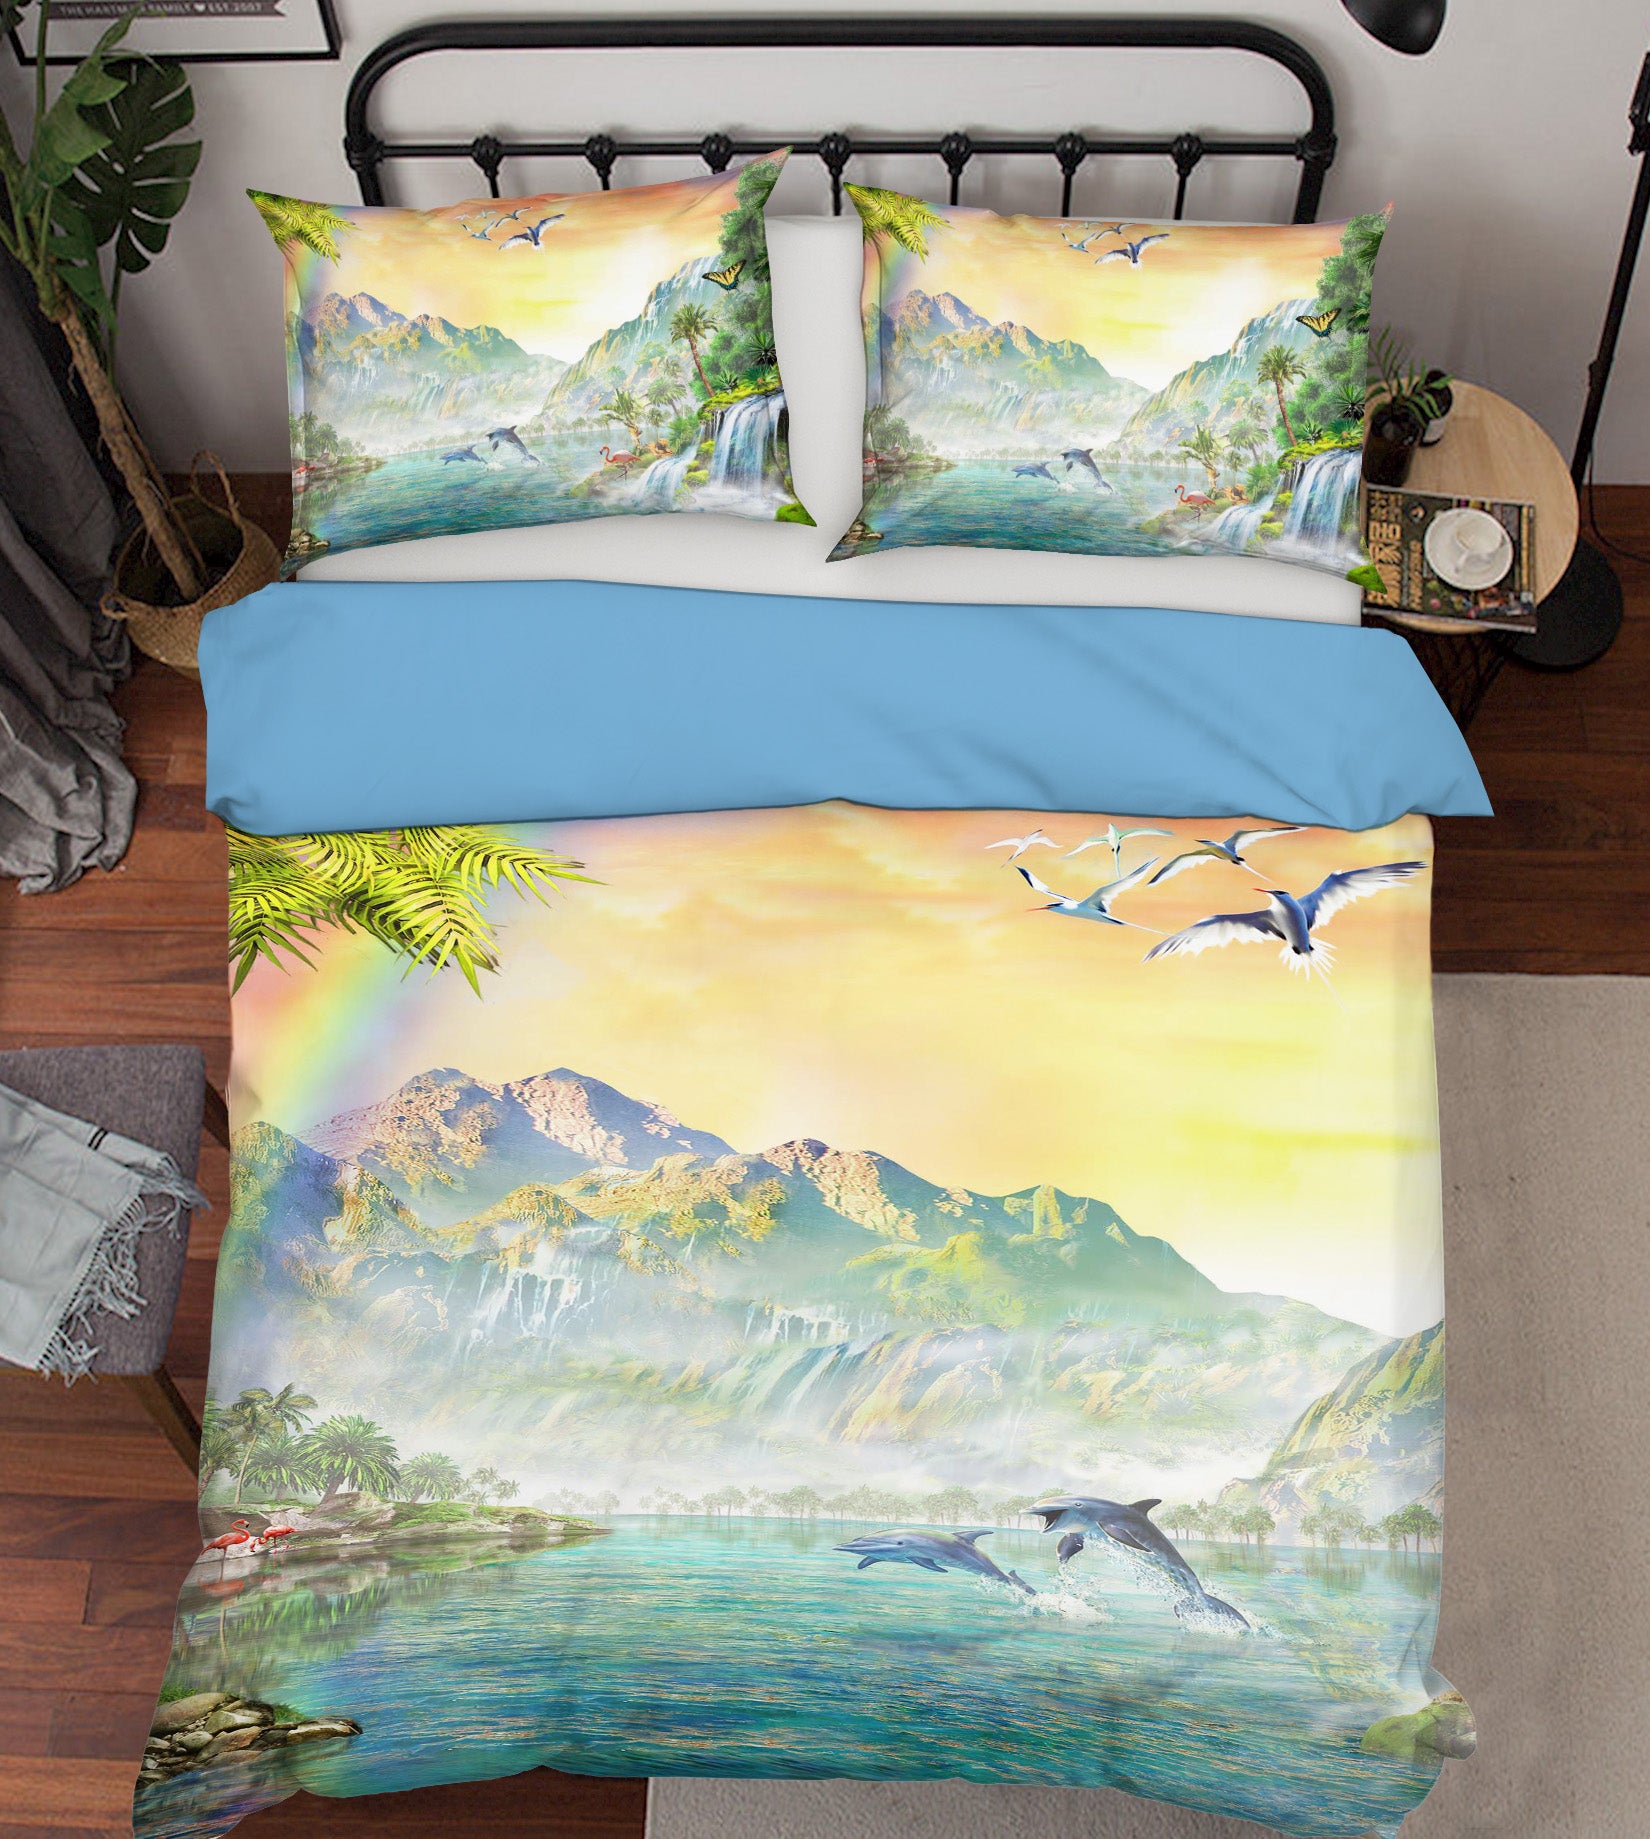 3D Atlantic Dolphins 2038 Adrian Chesterman Bedding Bed Pillowcases Quilt